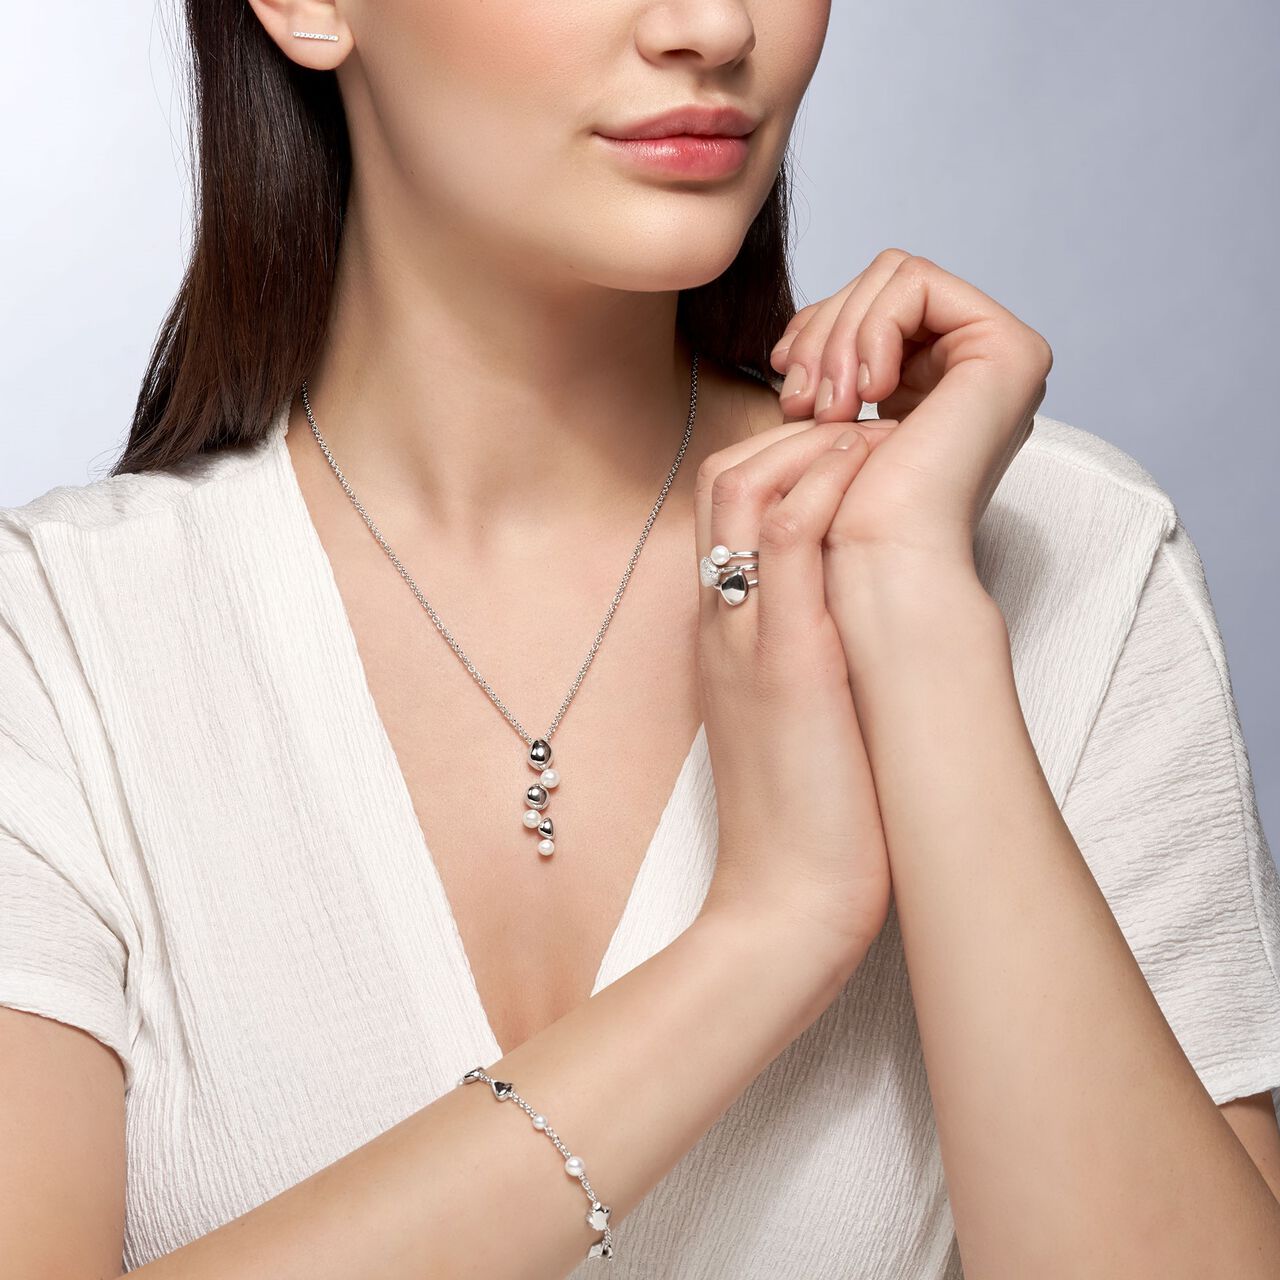 Birks Pebble Drop Necklace and Ring in Sterling Silver With Pearls on Model image number 1